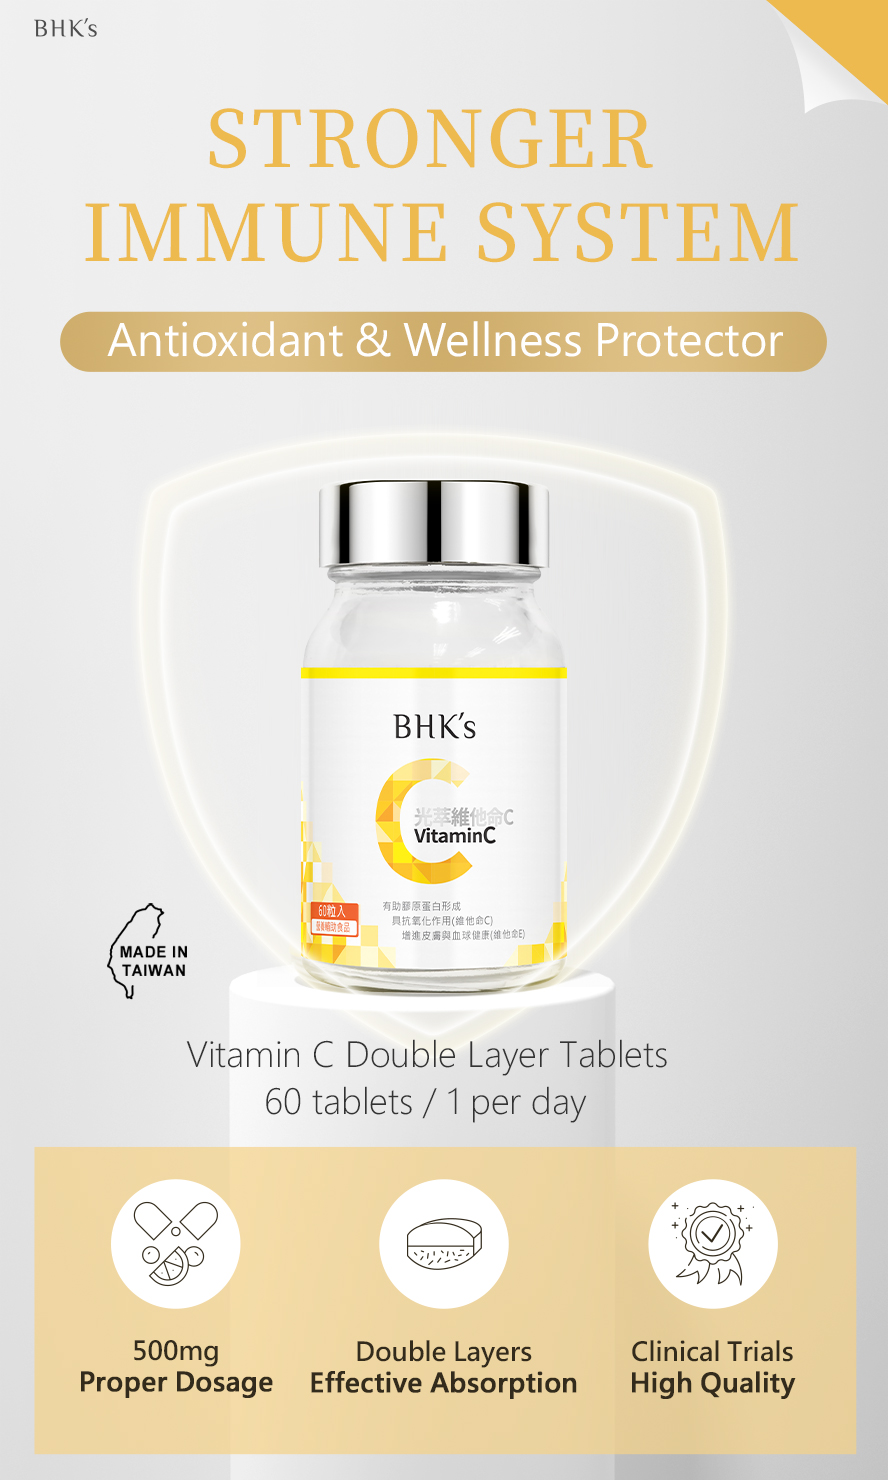 BHK's Vitamin C provides the protection for cells from DNA damage and maintaining a great level of energetic vitality